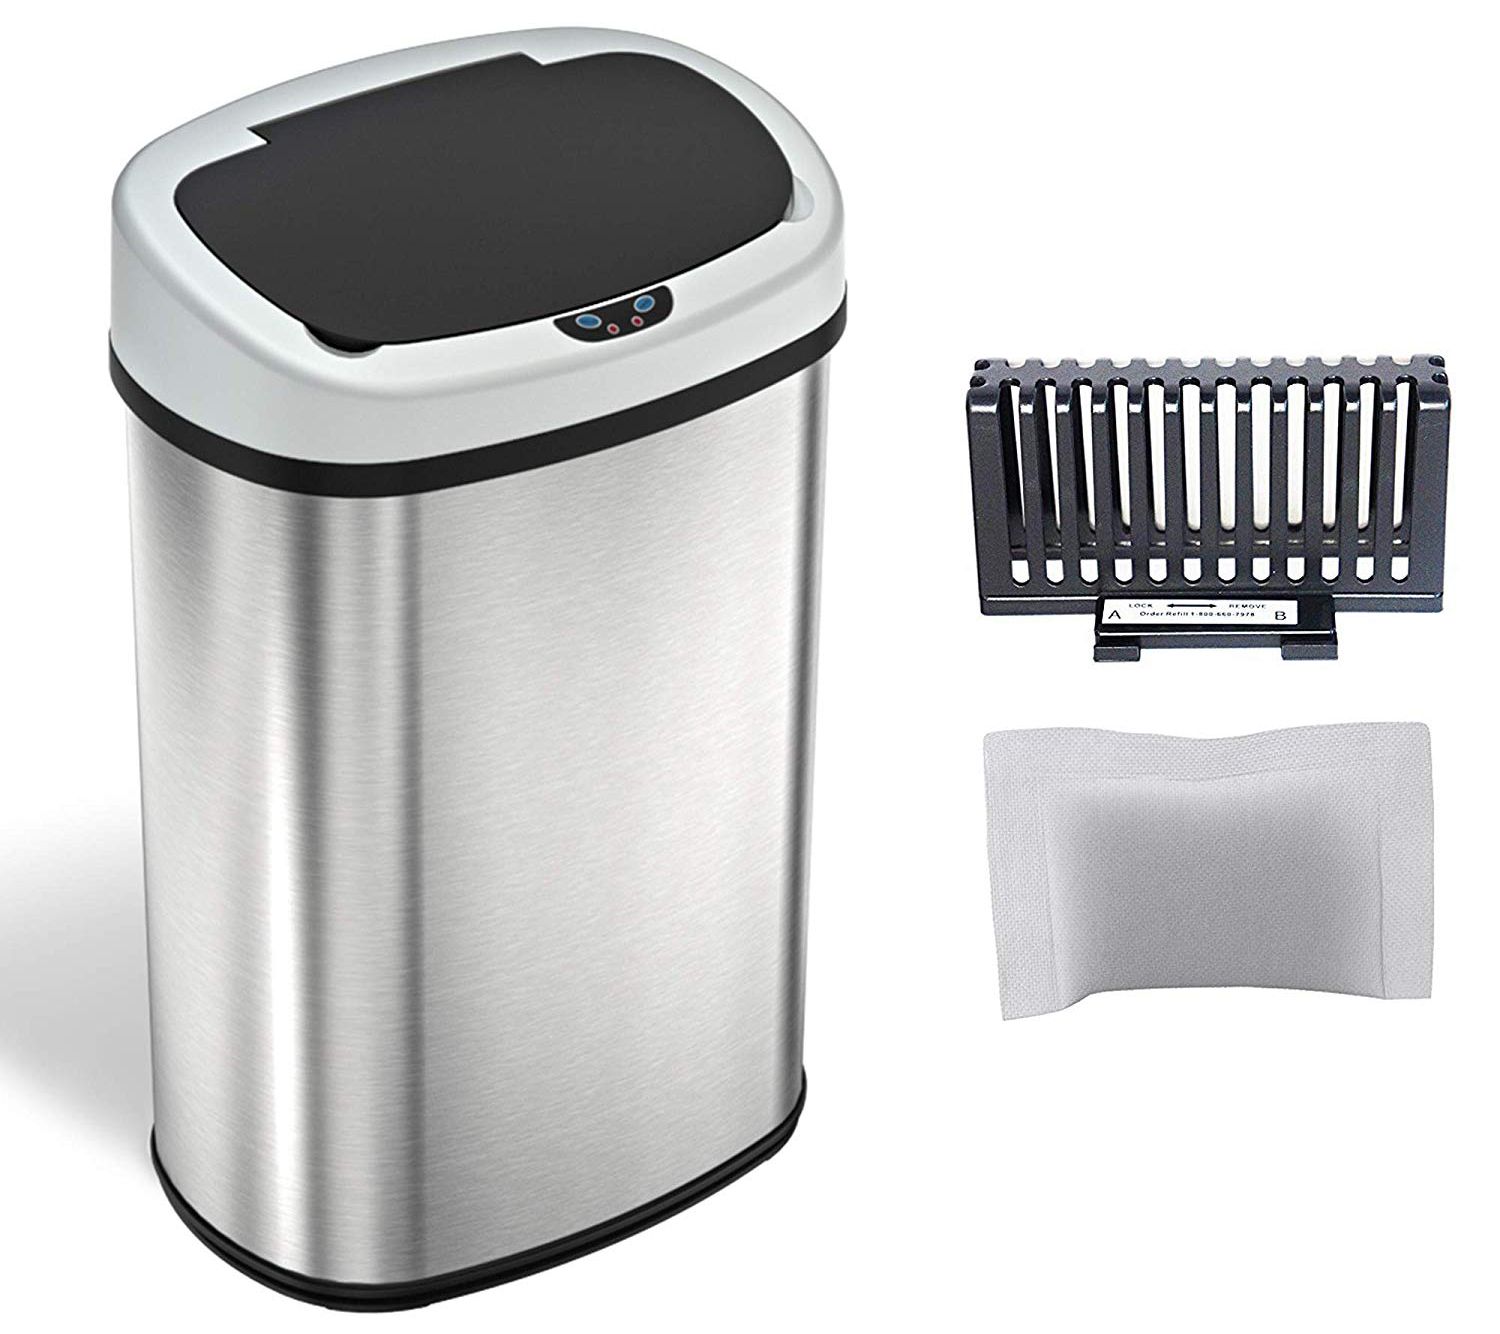 iTouchless Pet-Proof Sensor Kitchen Trash Can with AbsorbX Odor Filter 13 Gallon Silver Stainless Steel